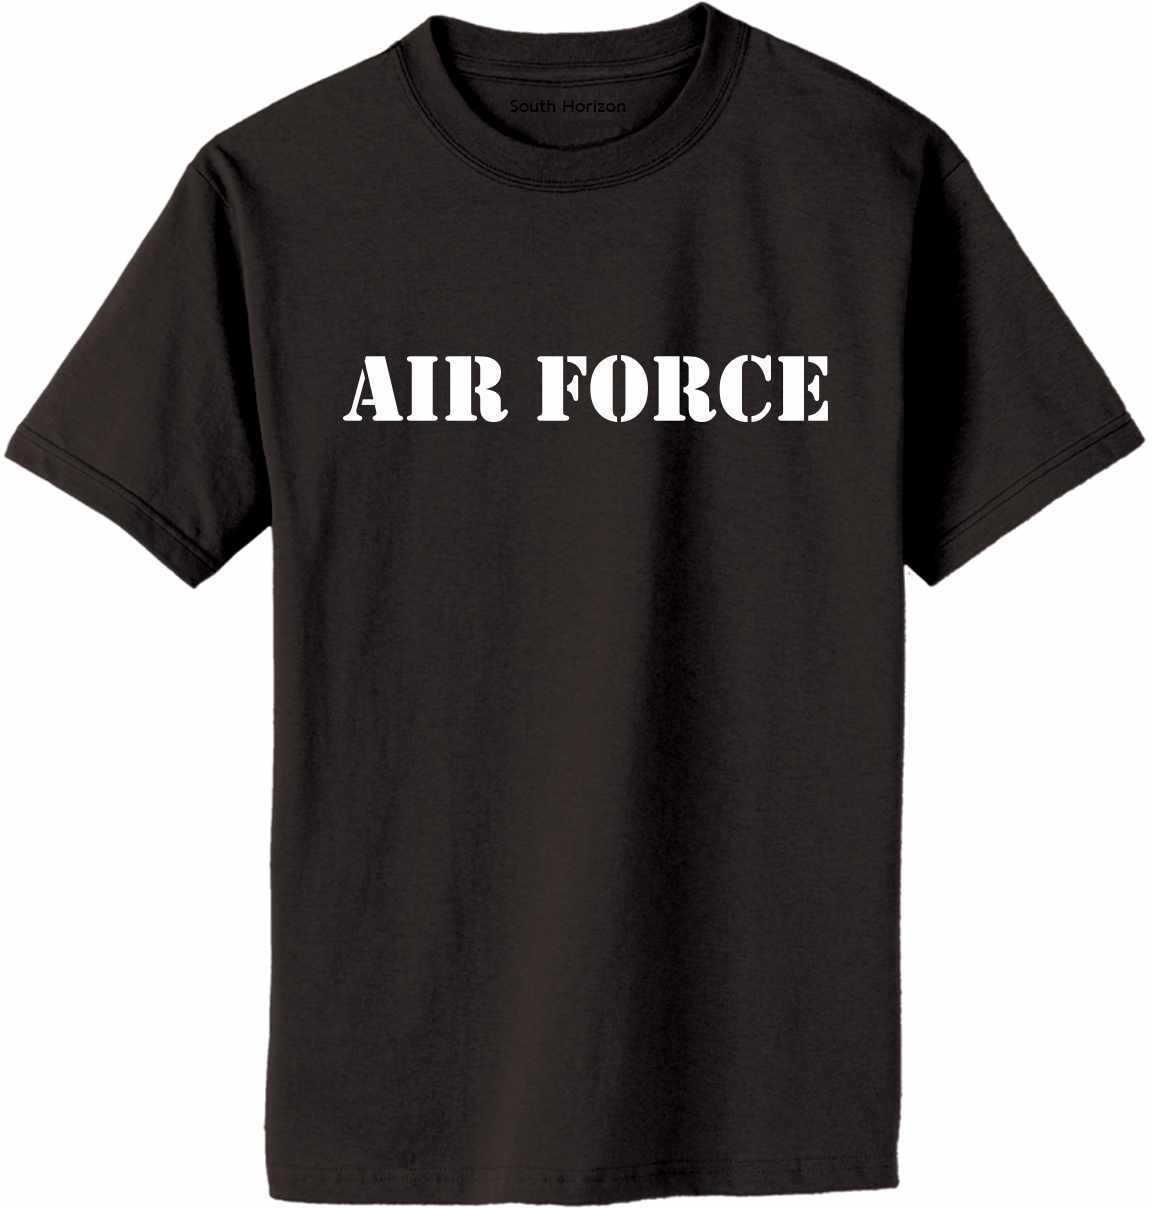 AIR FORCE Adult T-Shirt (#339-1)